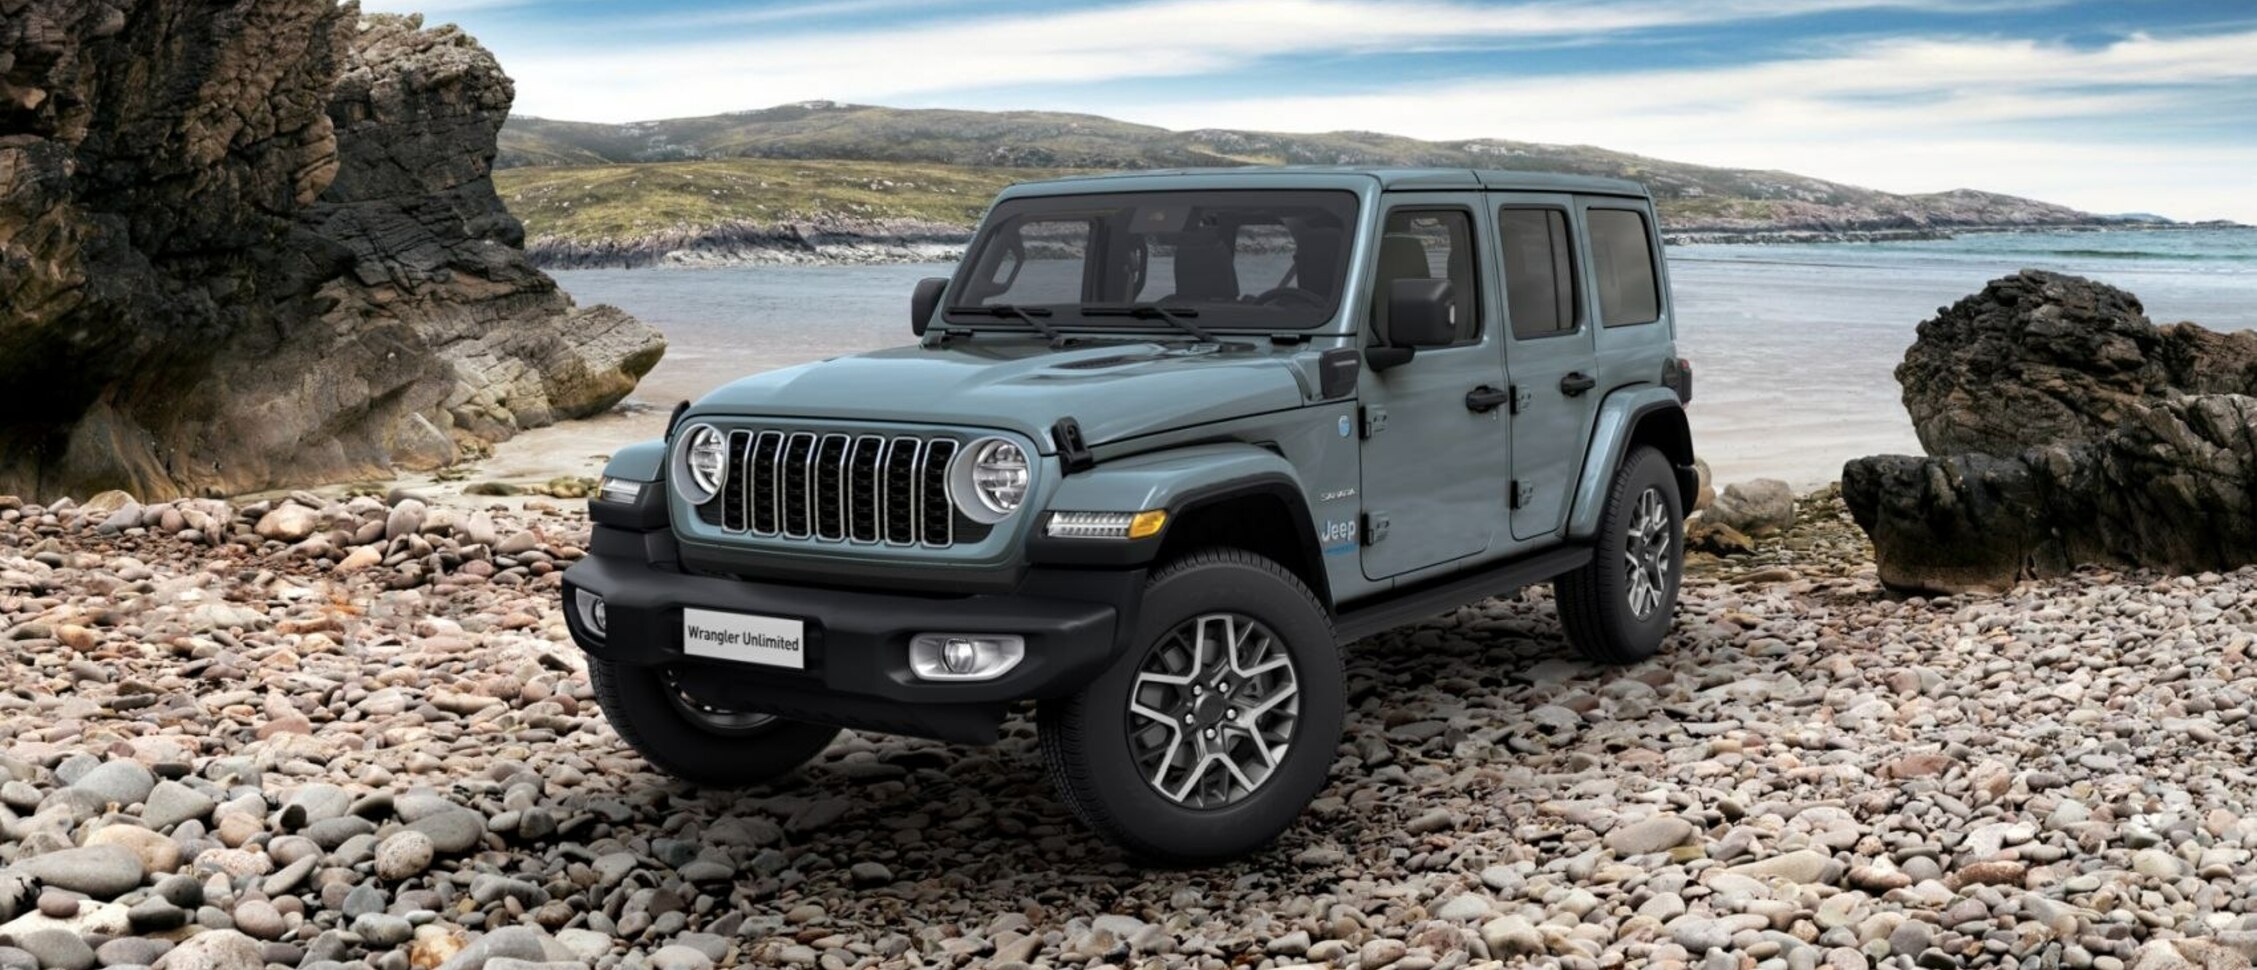 Jeep Wrangler IV Unlimited (JL, facelift 2023) Sahara 2.0 T-GDI (272 Hp) 4WD Automatic 2023